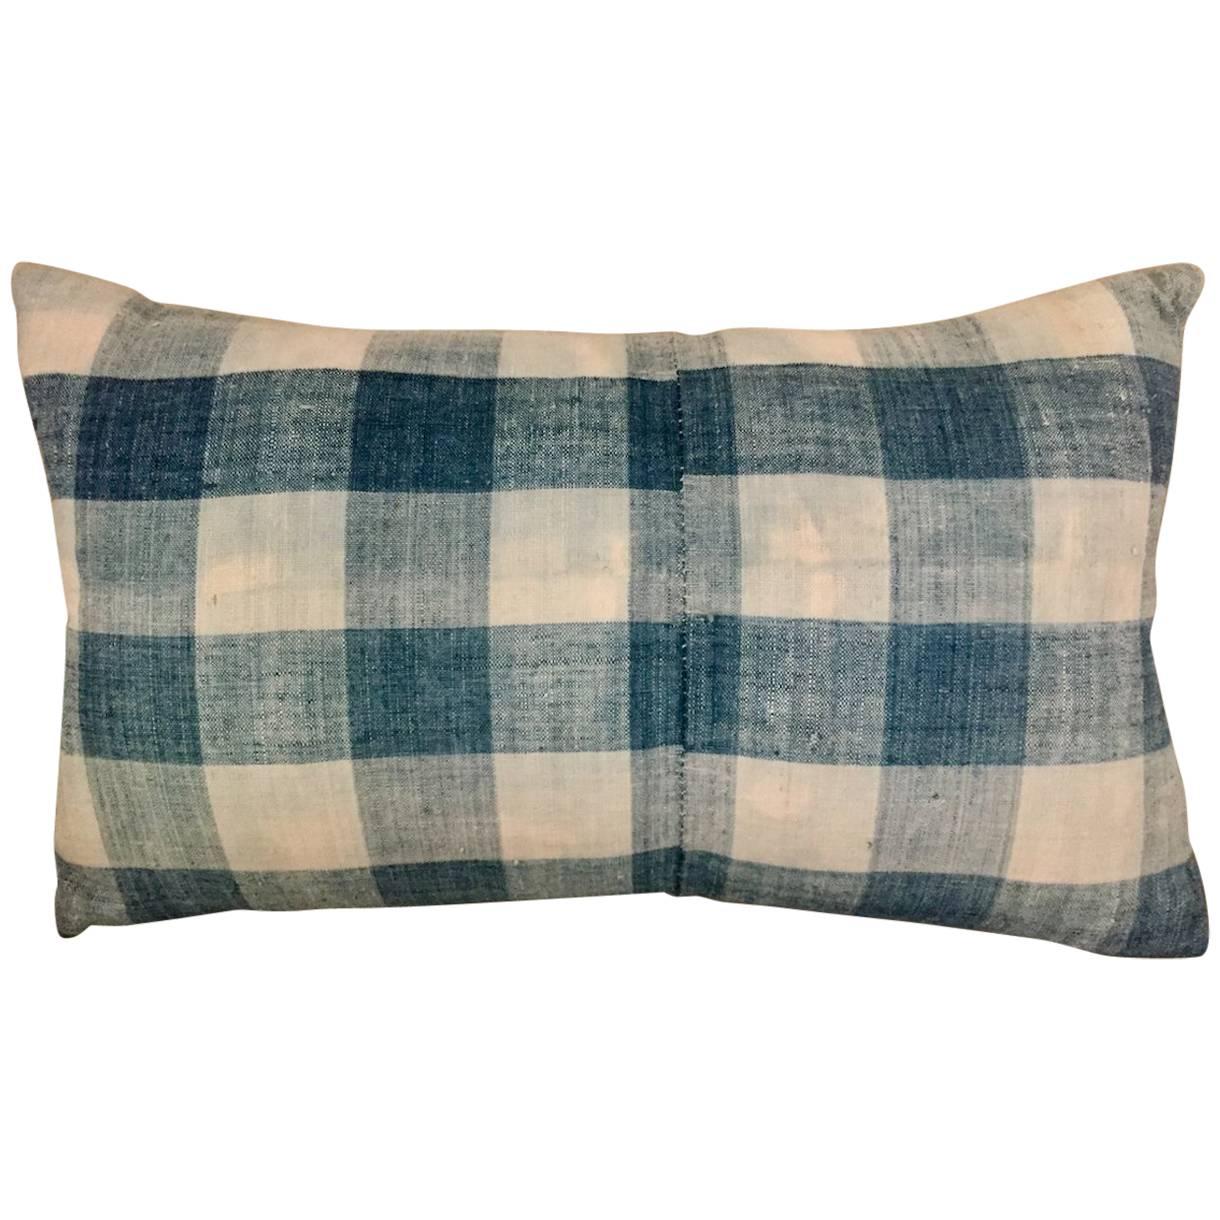 Mid-19th Century French Home Spun Indigo Dyed Check Pillow #9 For Sale